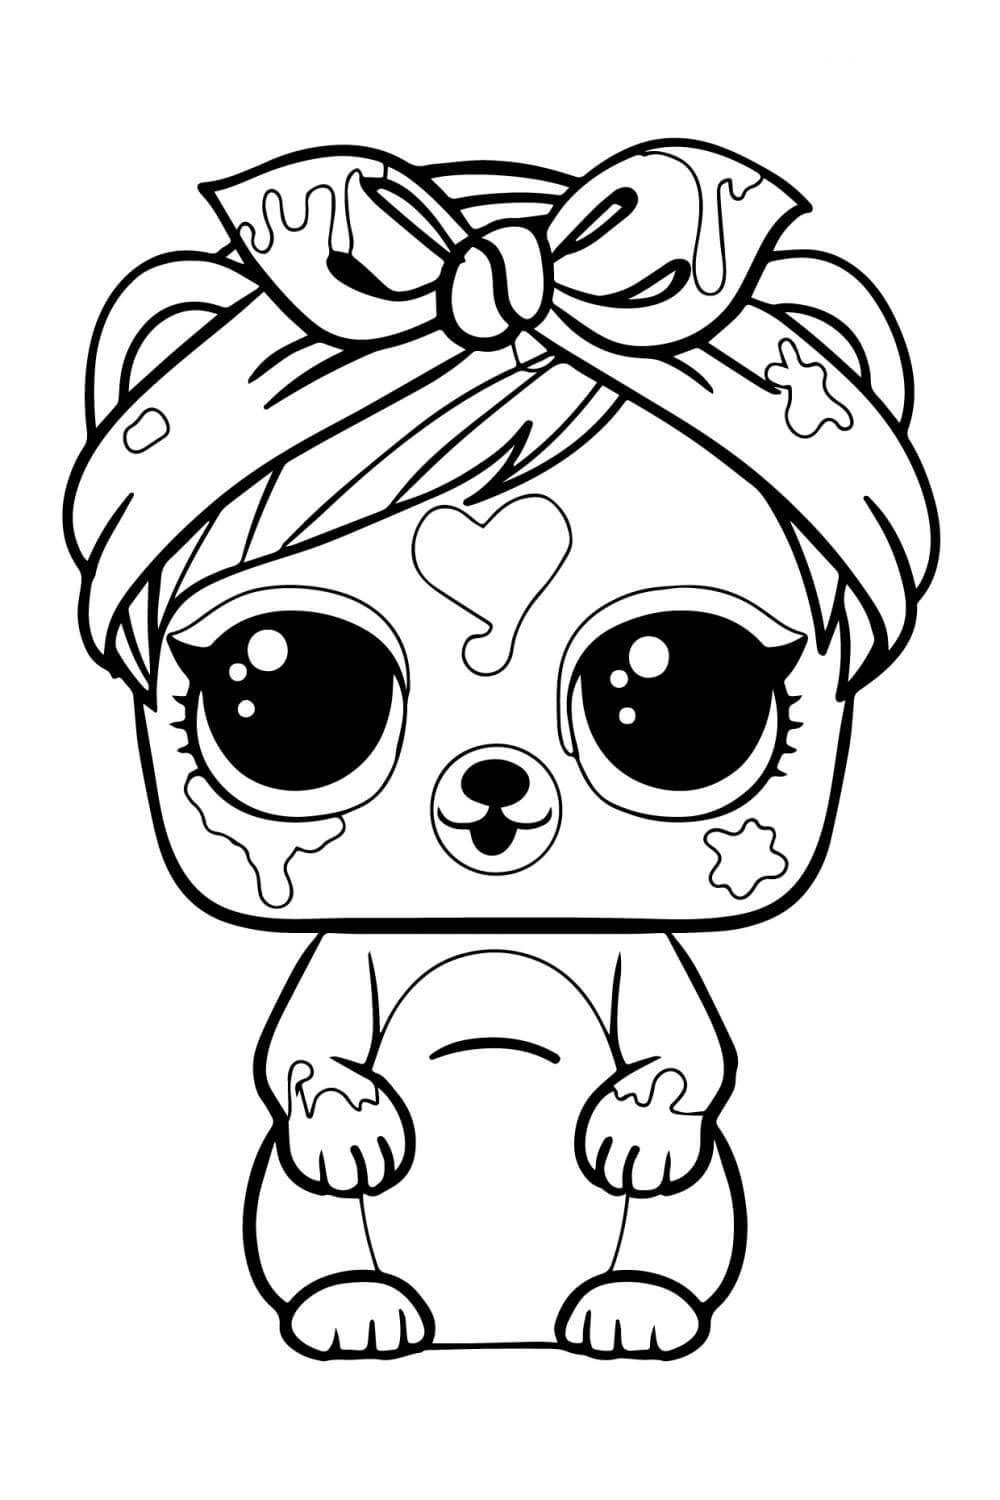 LOL Pet Squirrel Splashes Coloring Page   Free Printable Coloring ...